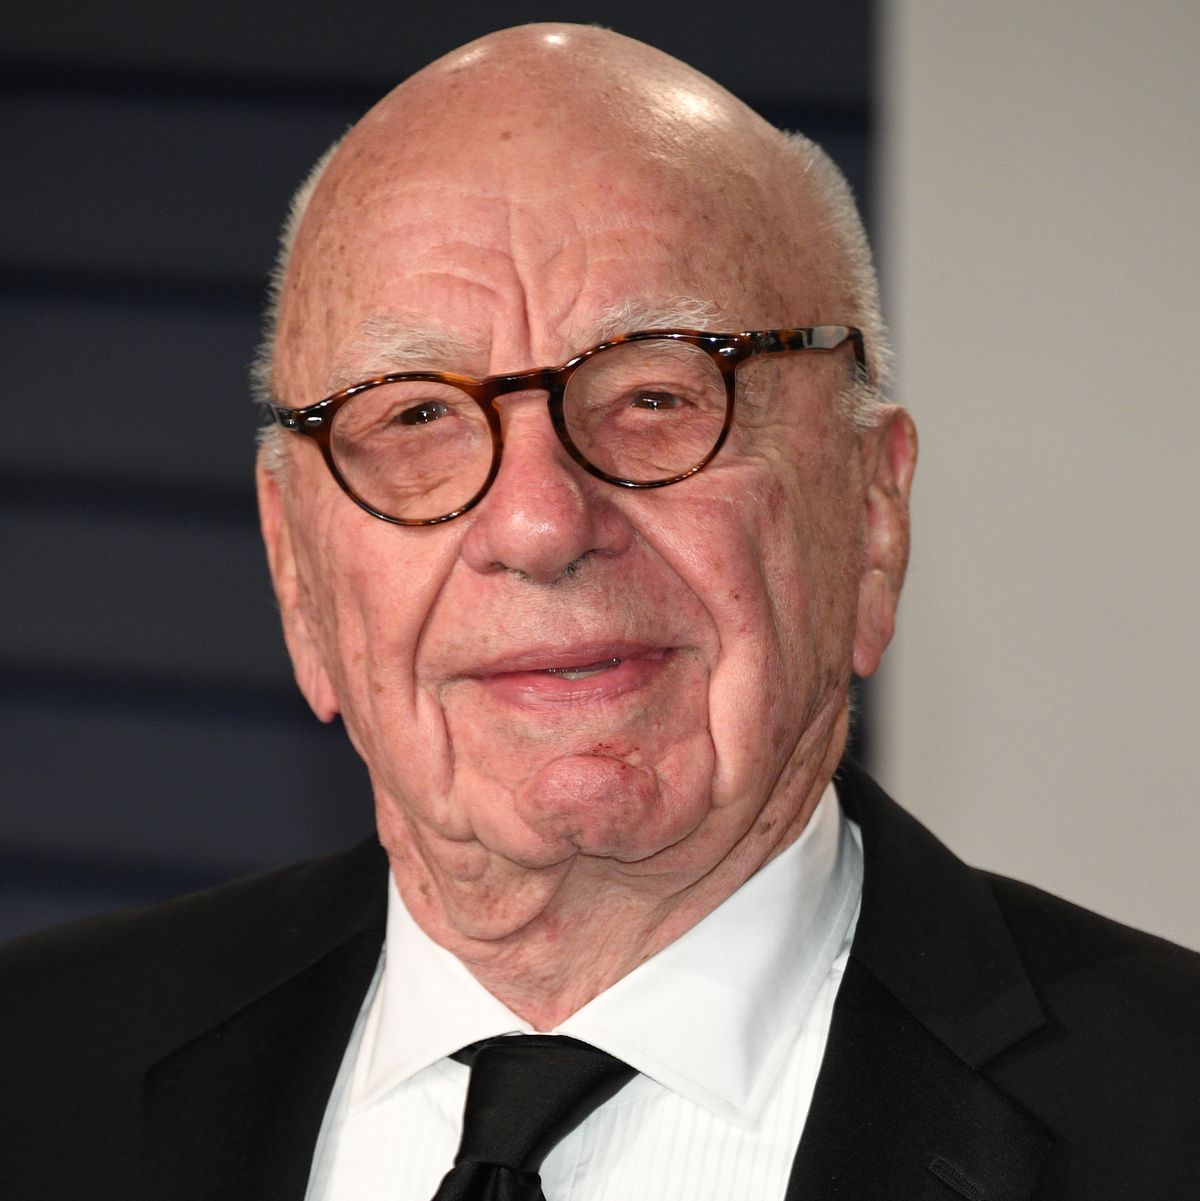 rupert murdoch looks at the camera with a slight smile, he is wearing a black suit jacket, white collard shirt, black tie, and brown tortoise shell glasses